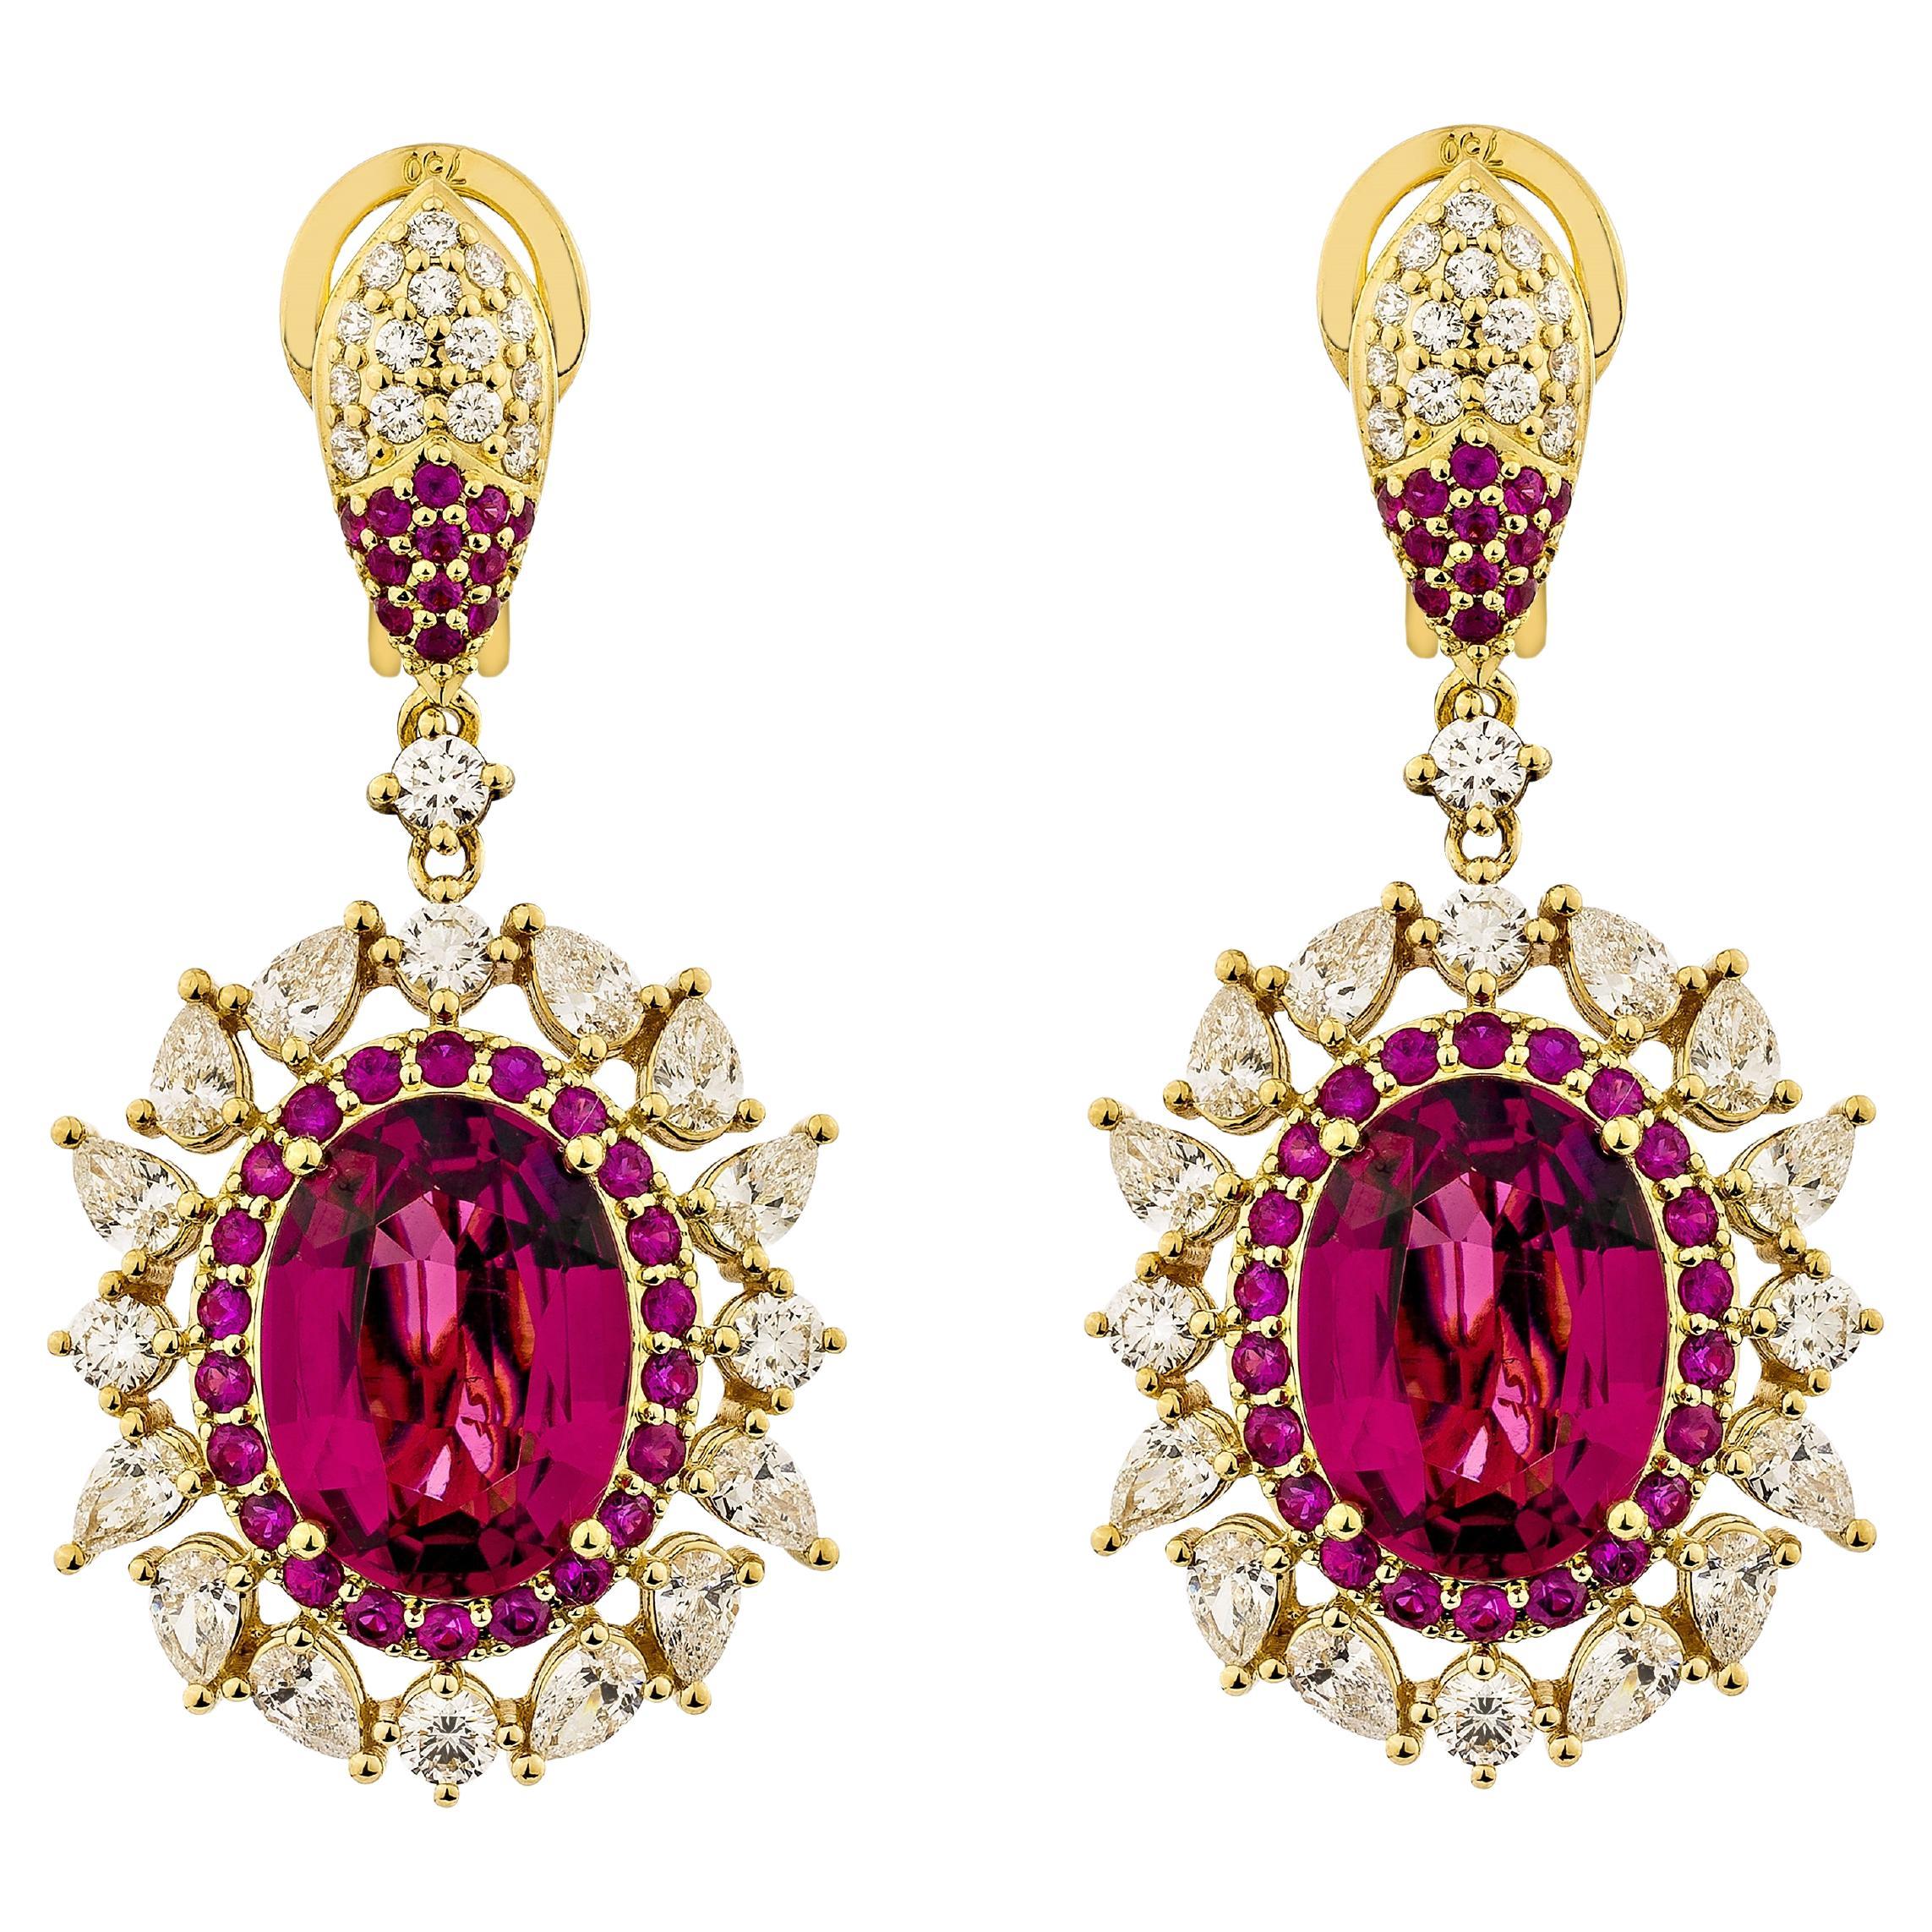 10.962 Carat Rubellite Drop Earrings in 18KYG with Ruby and White Diamond. For Sale